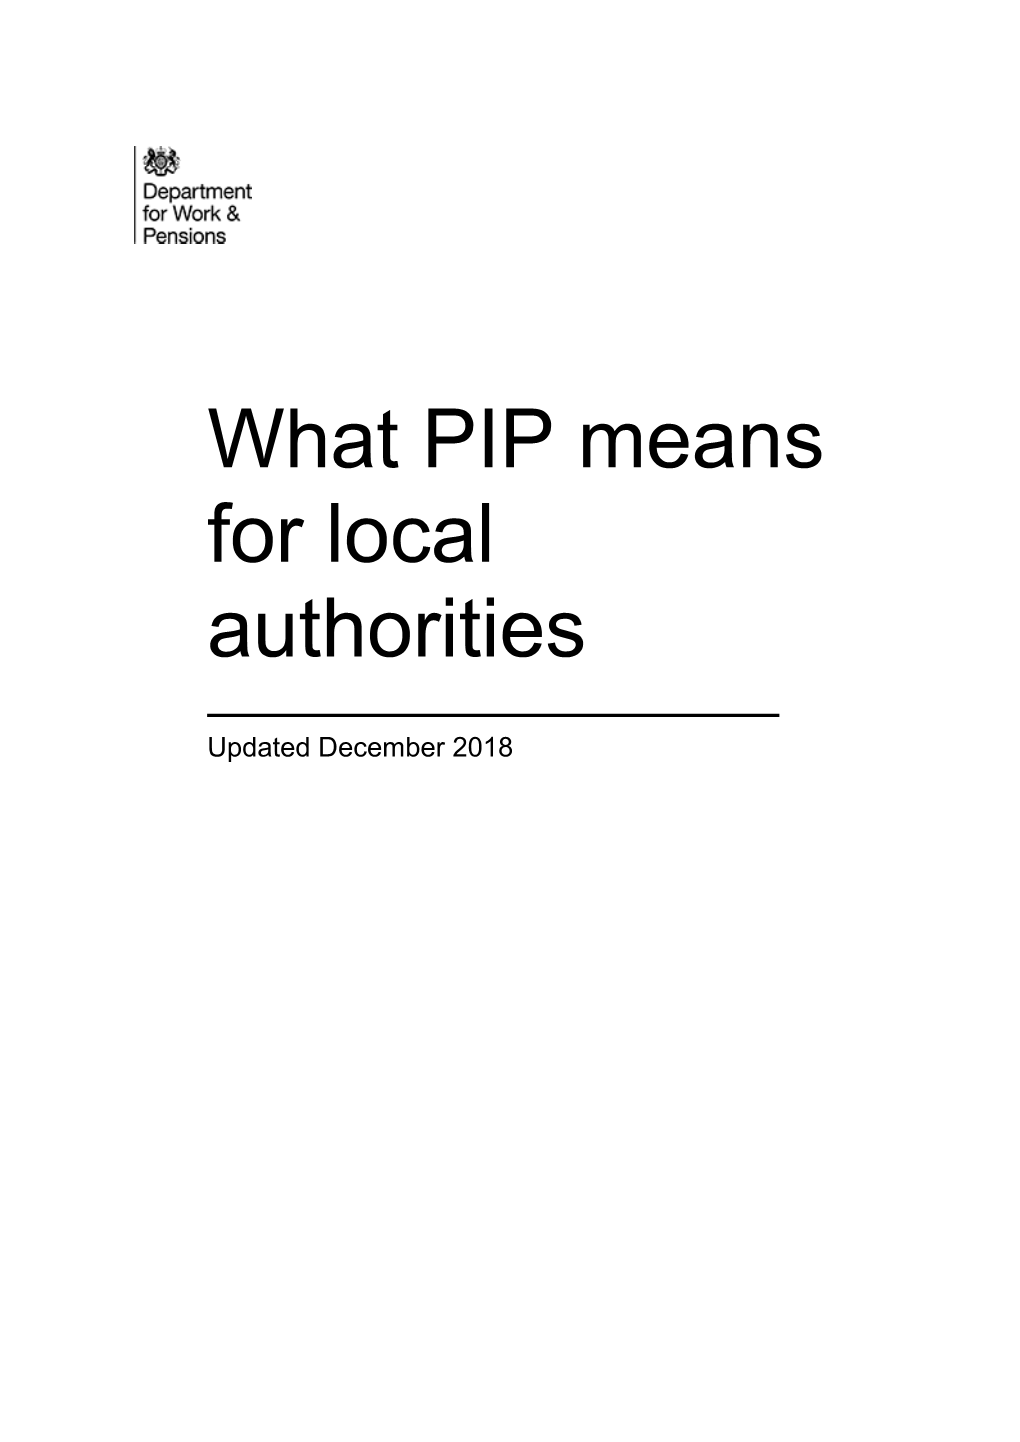 What PIP Means for Local Authorities